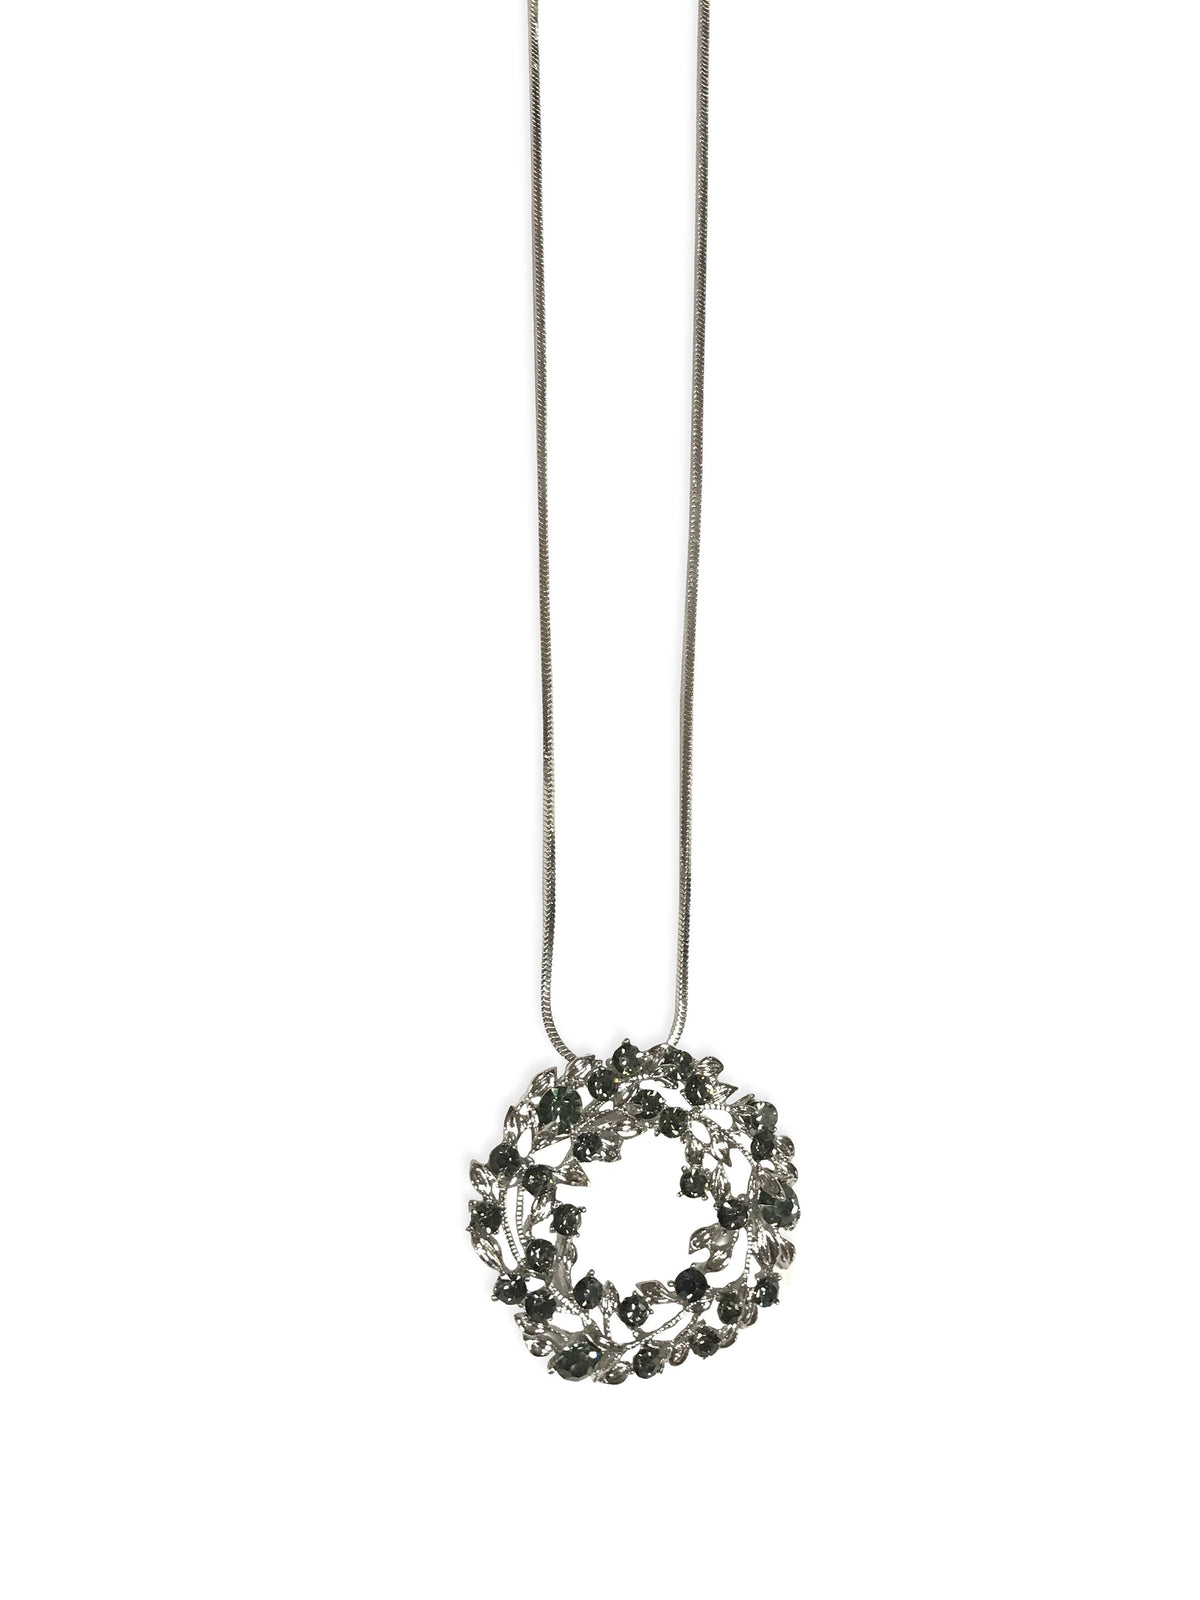 Studded Moon Necklace